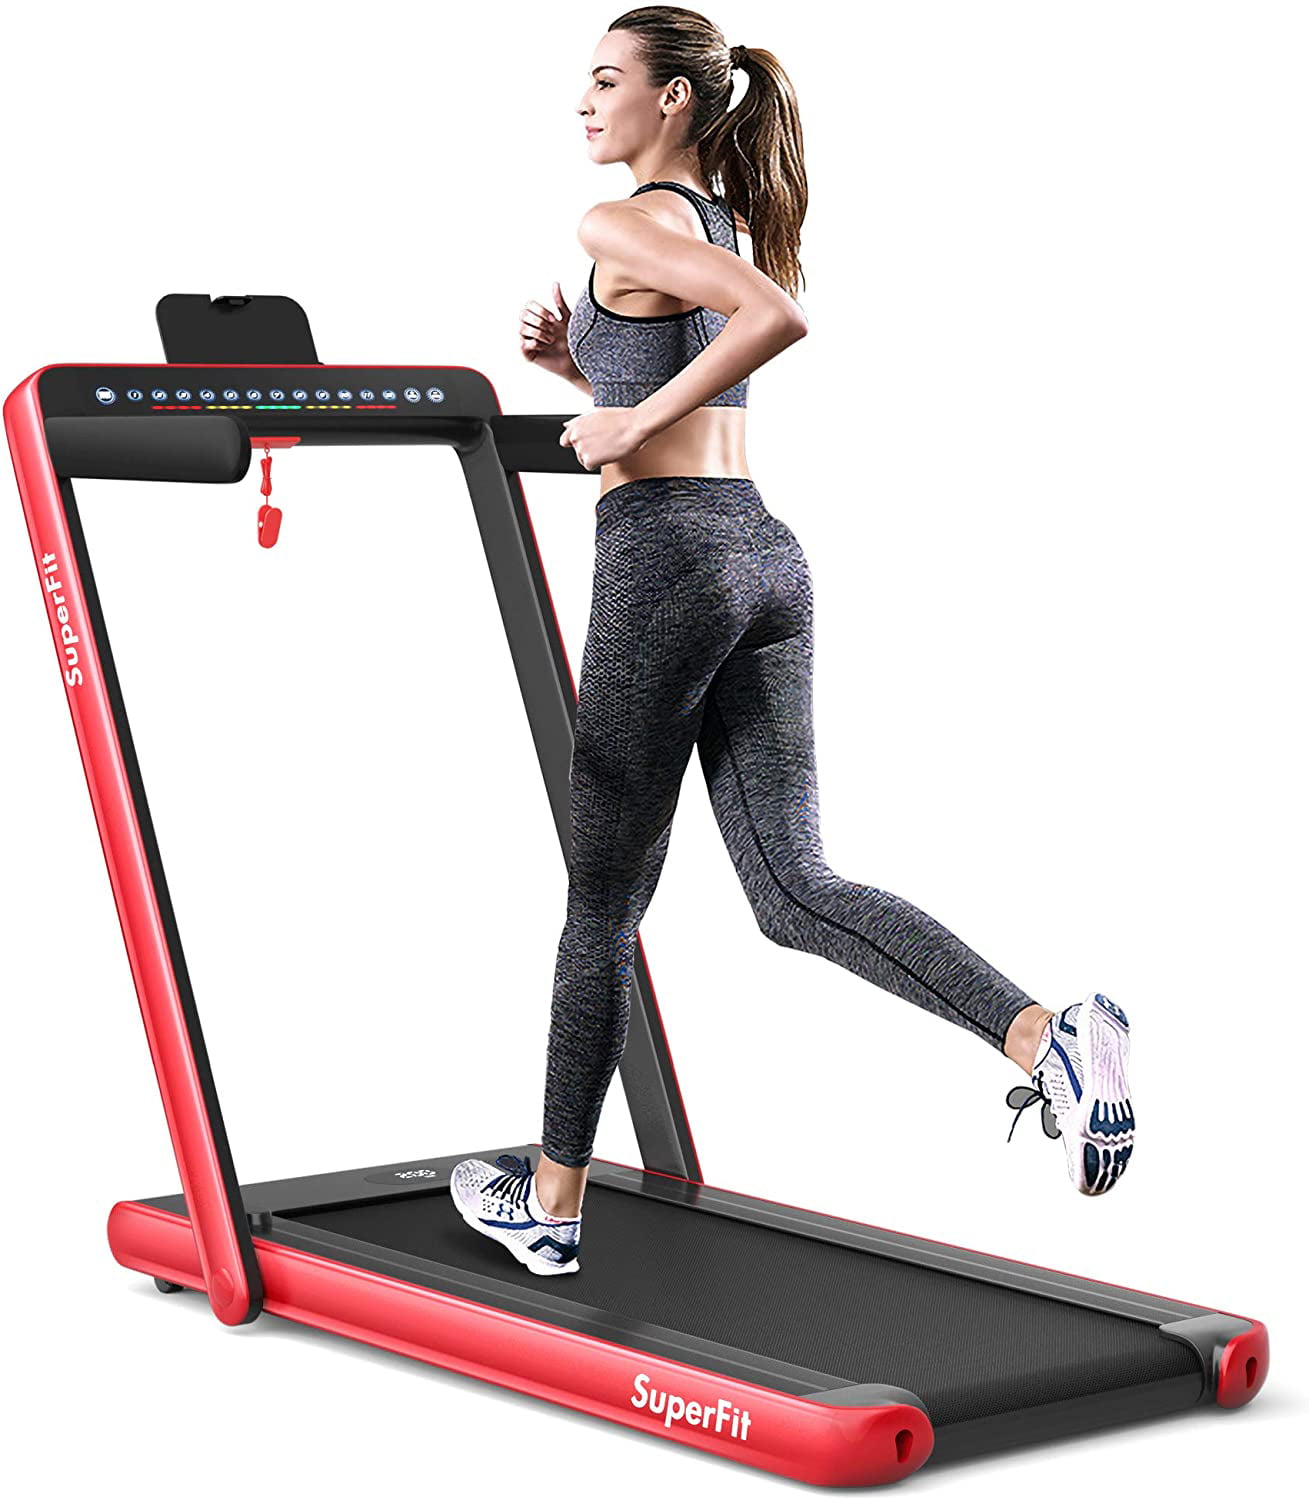 ANCHEER 2.25HP Treadmill 2 in 1 Folding Electric Running Machine Smooth Quiet US 